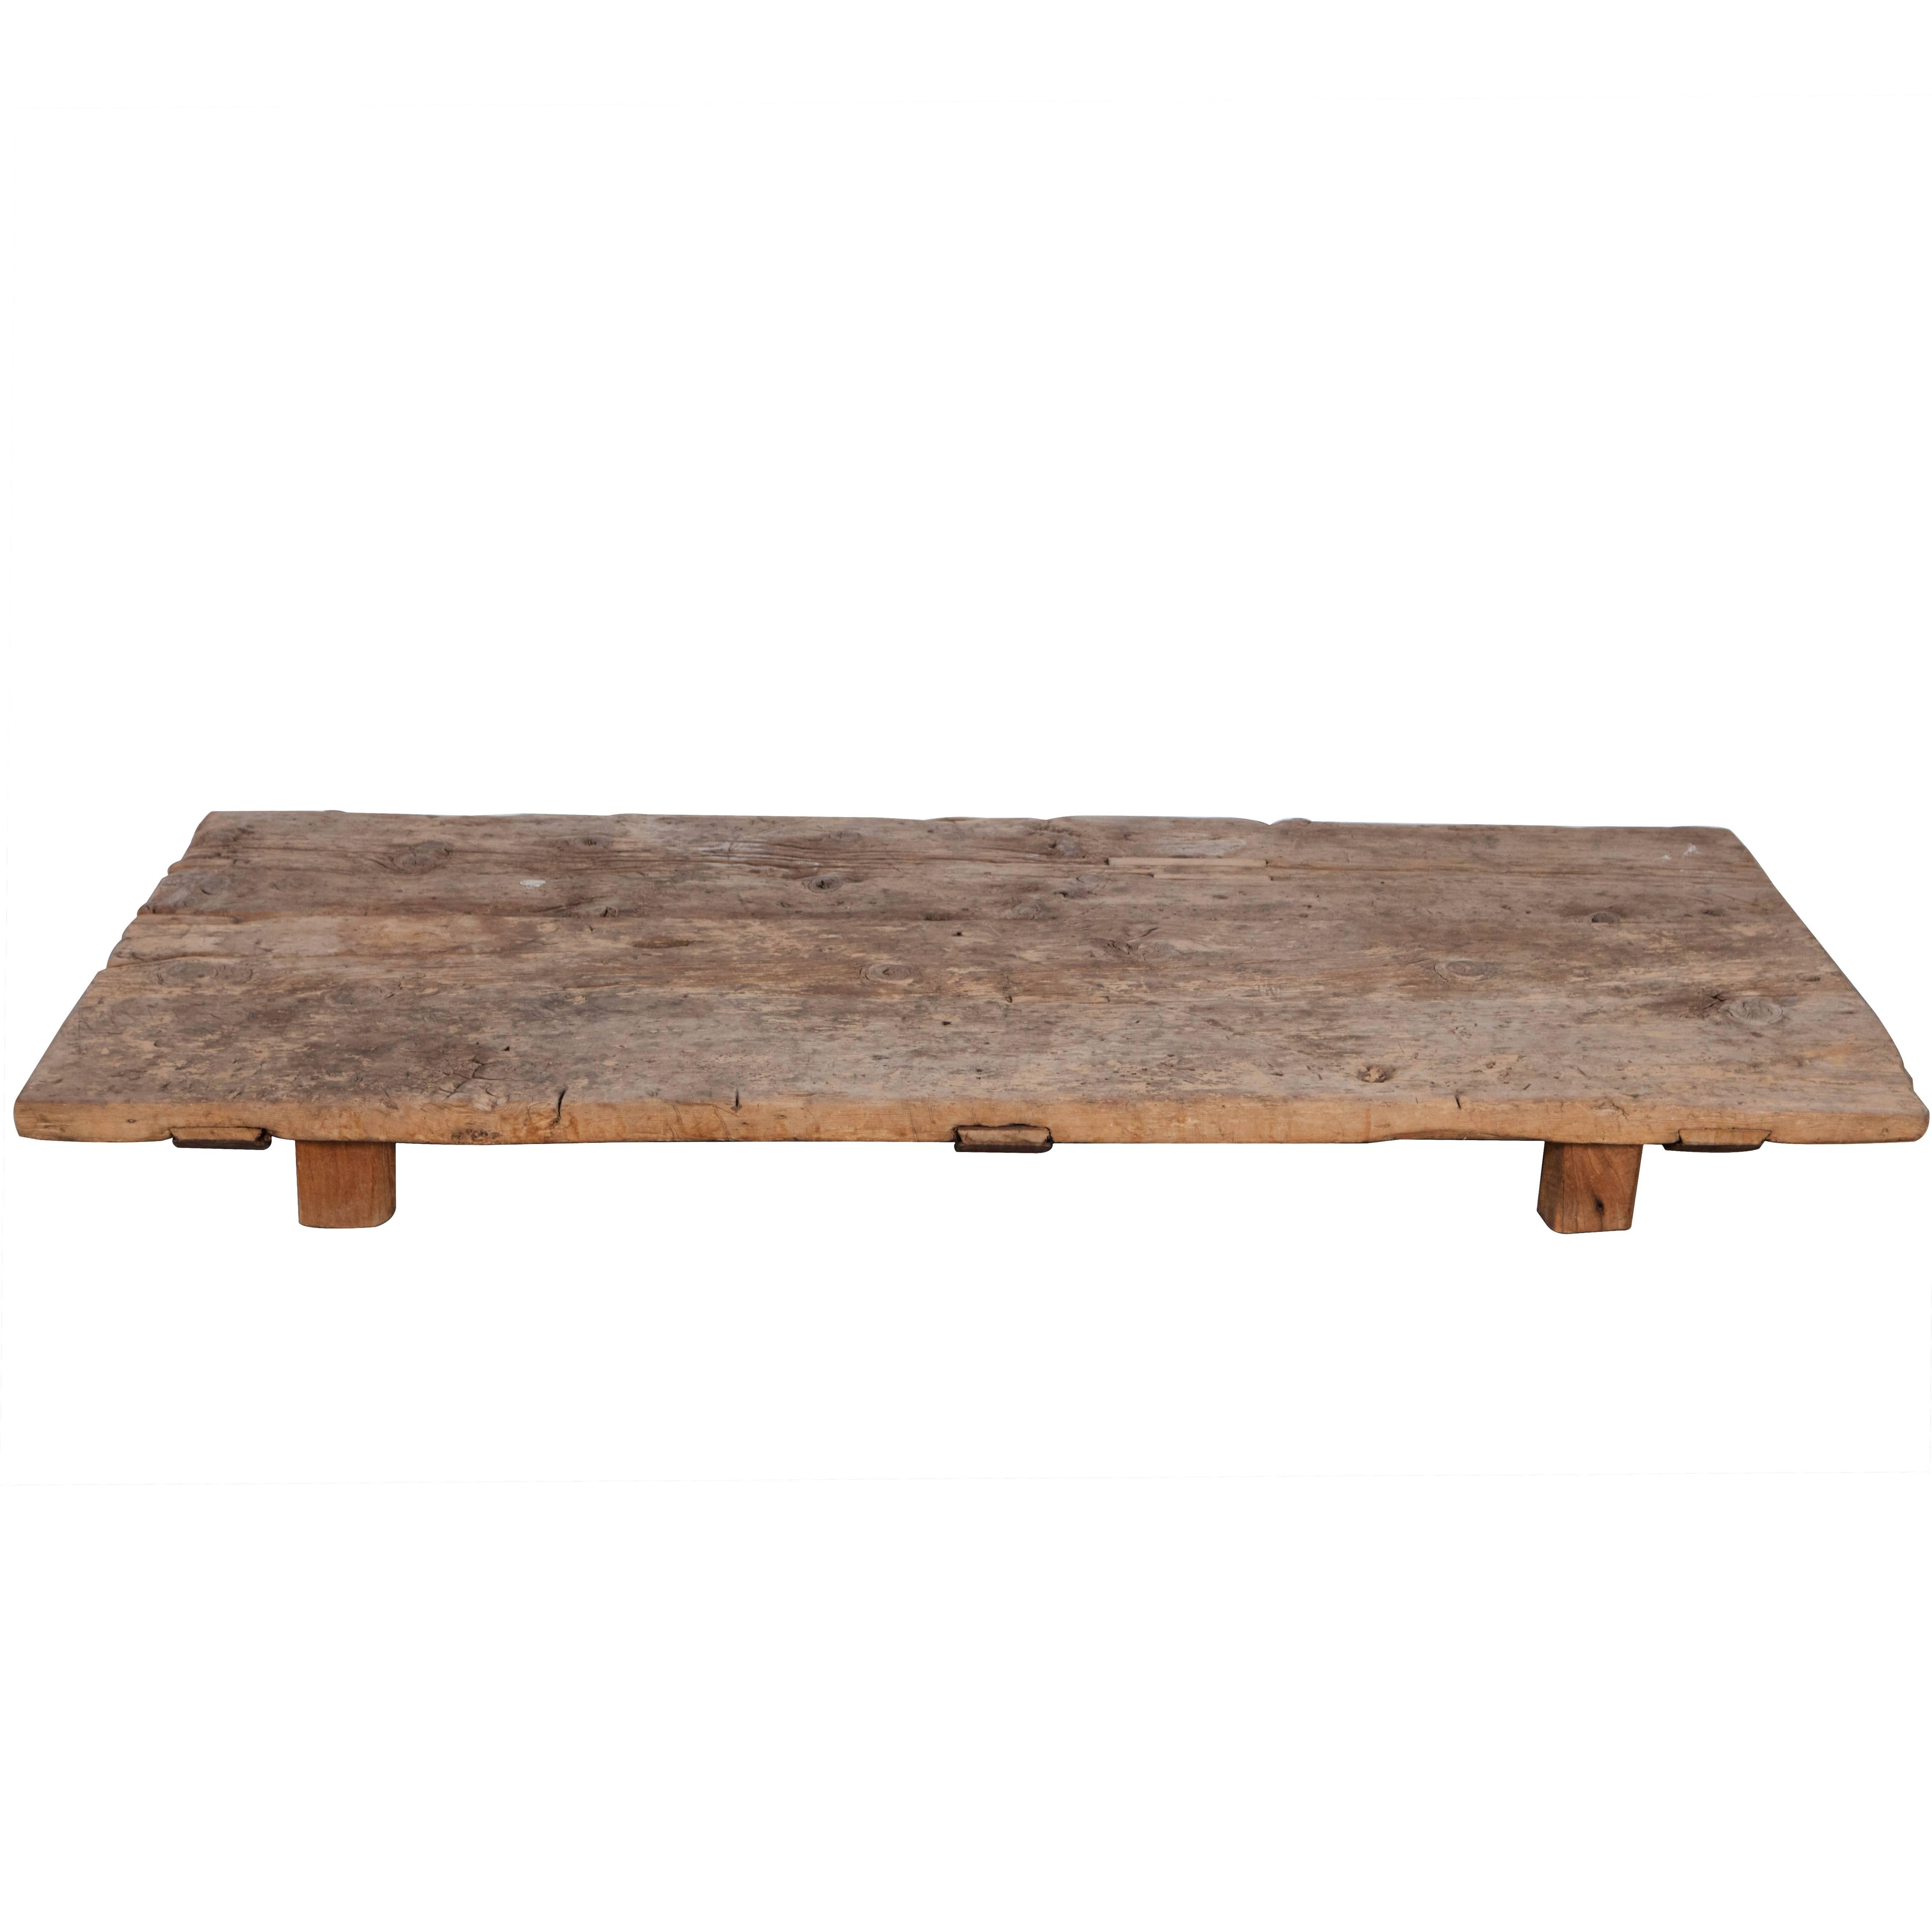 Very Low Distressed Coffee Table